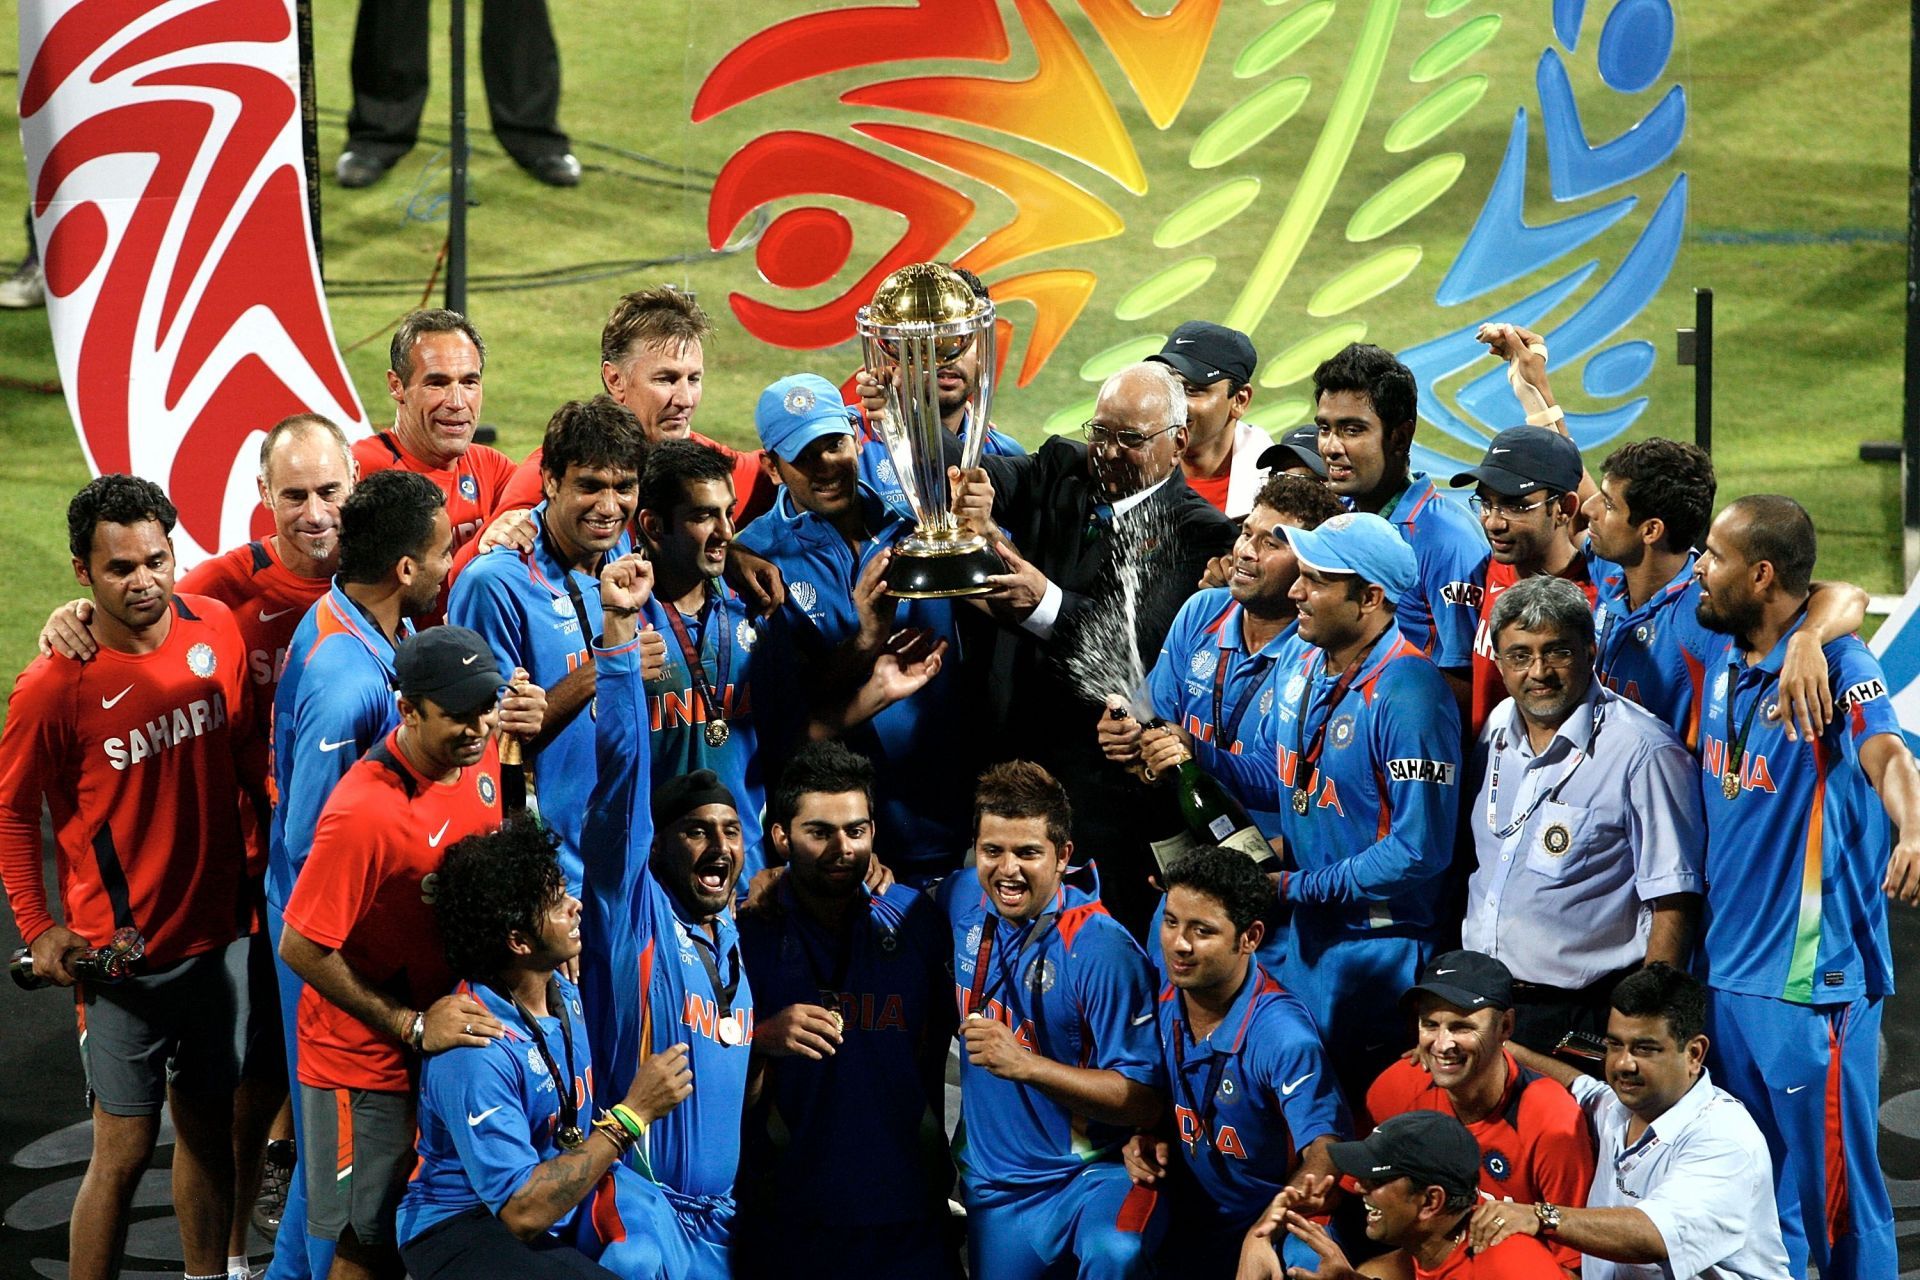            Team India lifted the ODI World Cup in 2011. (Pic: Getty Images)